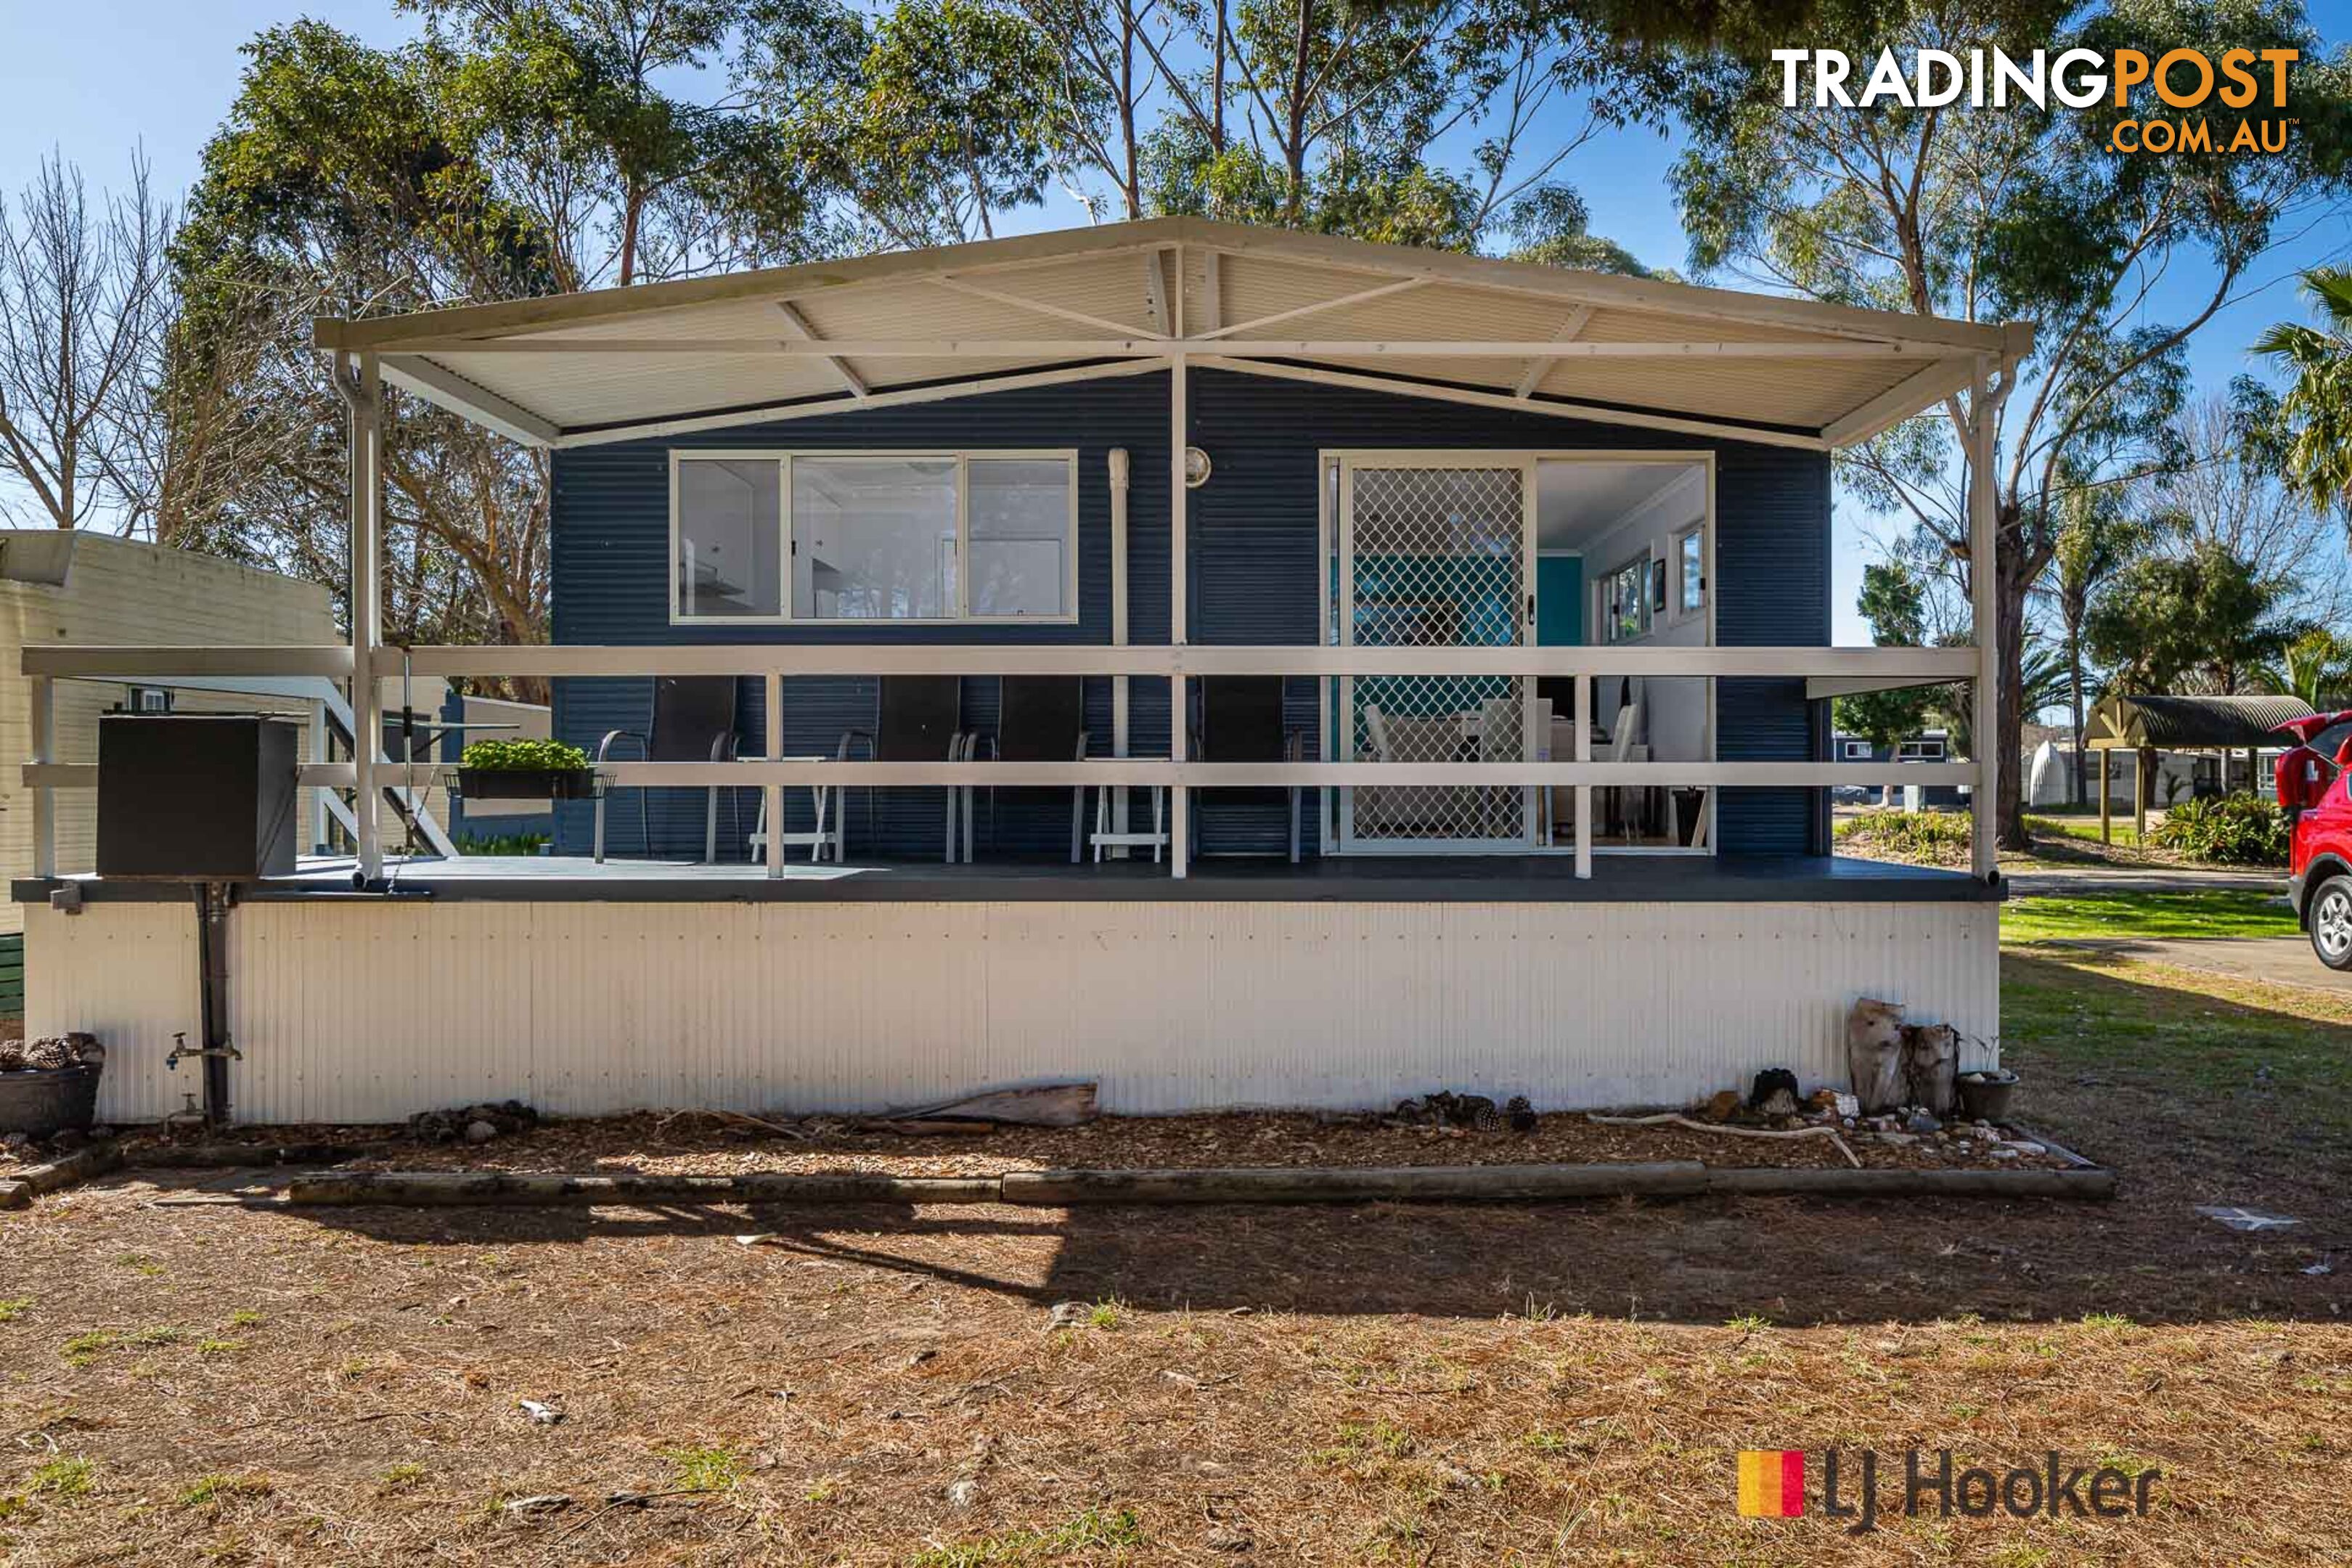 Site 37/55 Sunpatch Parade TOMAKIN NSW 2537